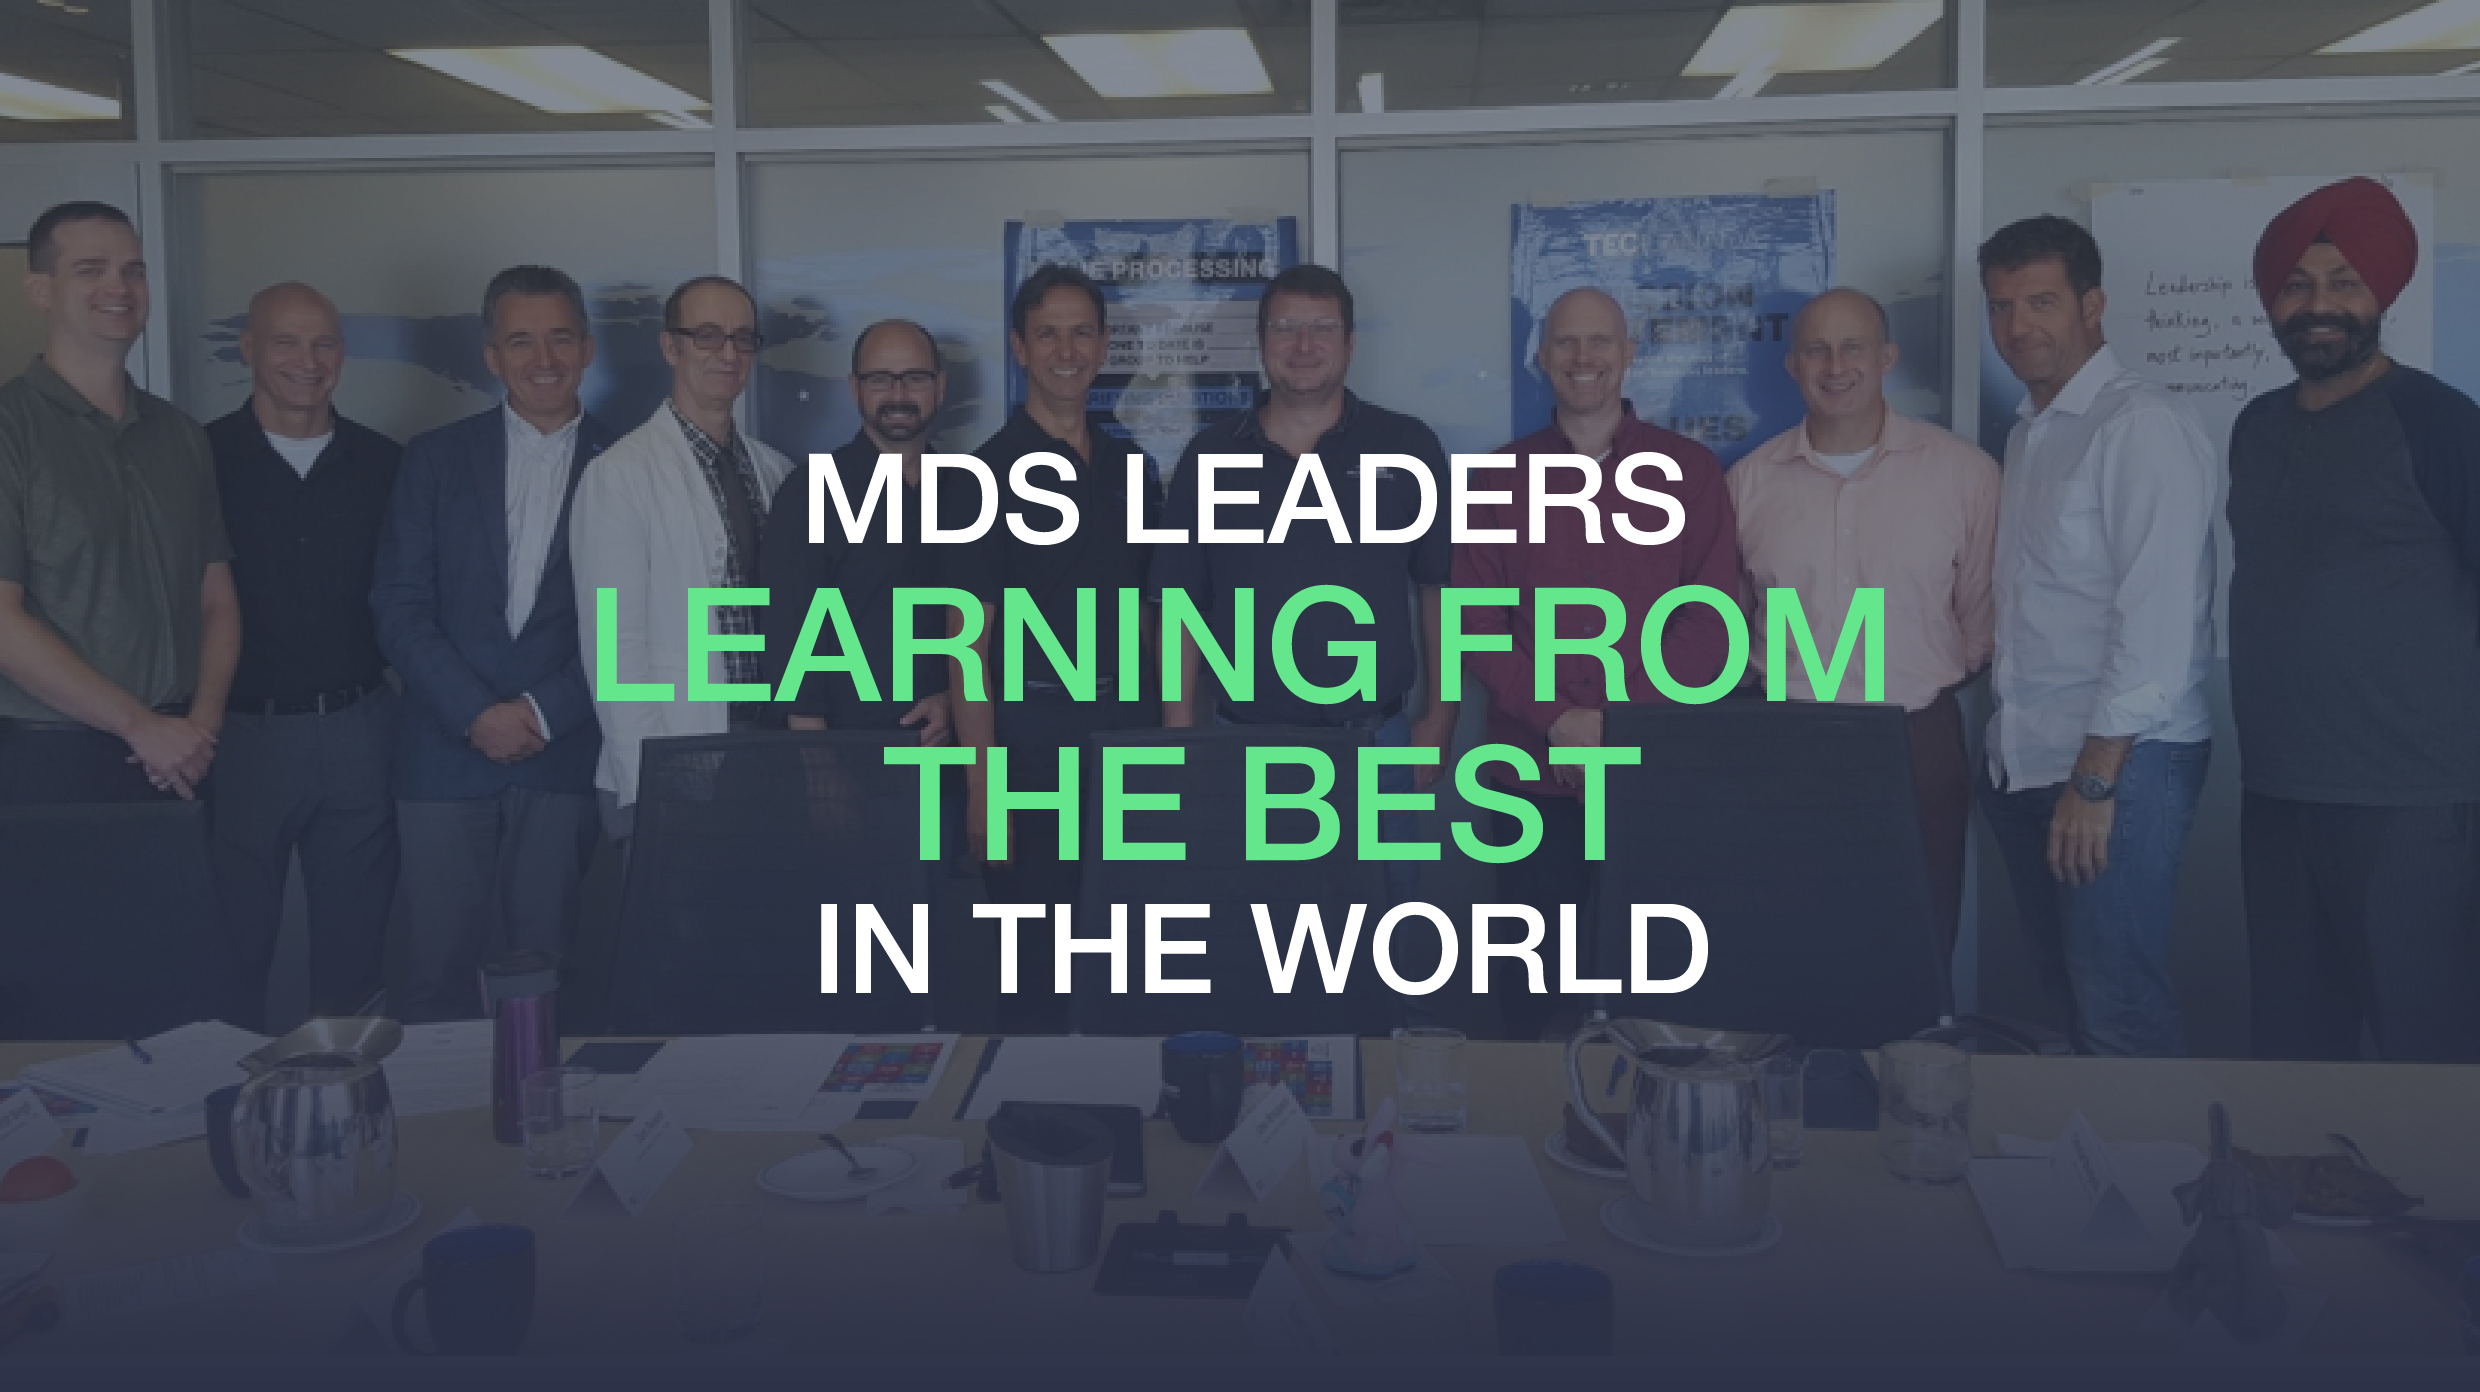 MDS Leaders learning from the best in the world